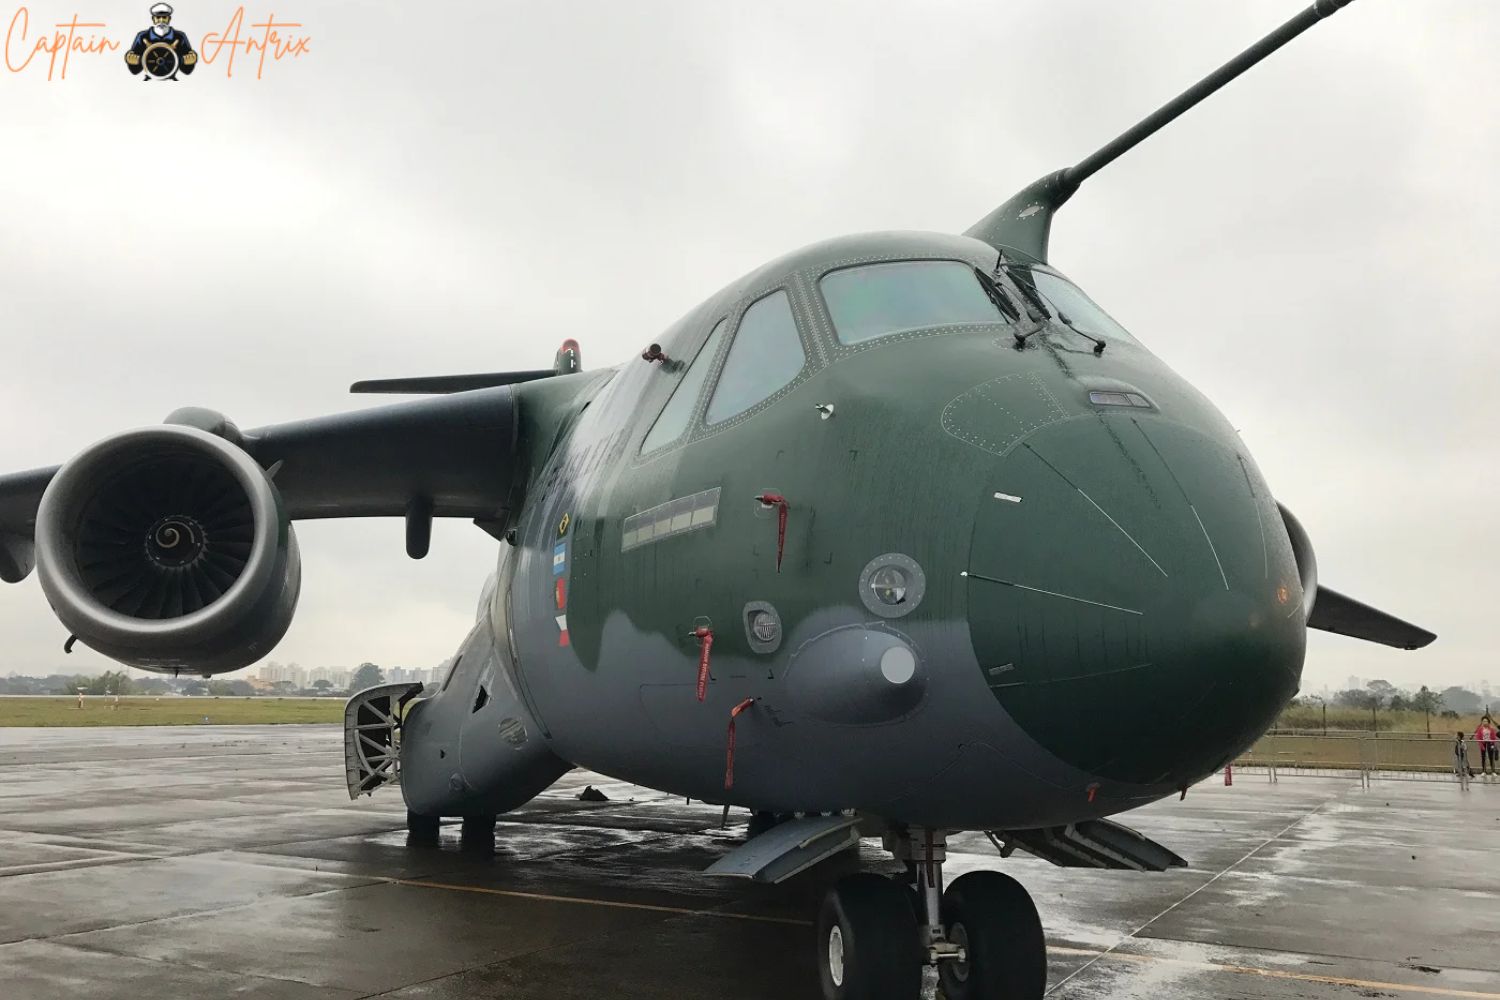 Embraer and Mahindra Join Forces to Revolutionize India's Defense with C-390 Millennium Aircraft